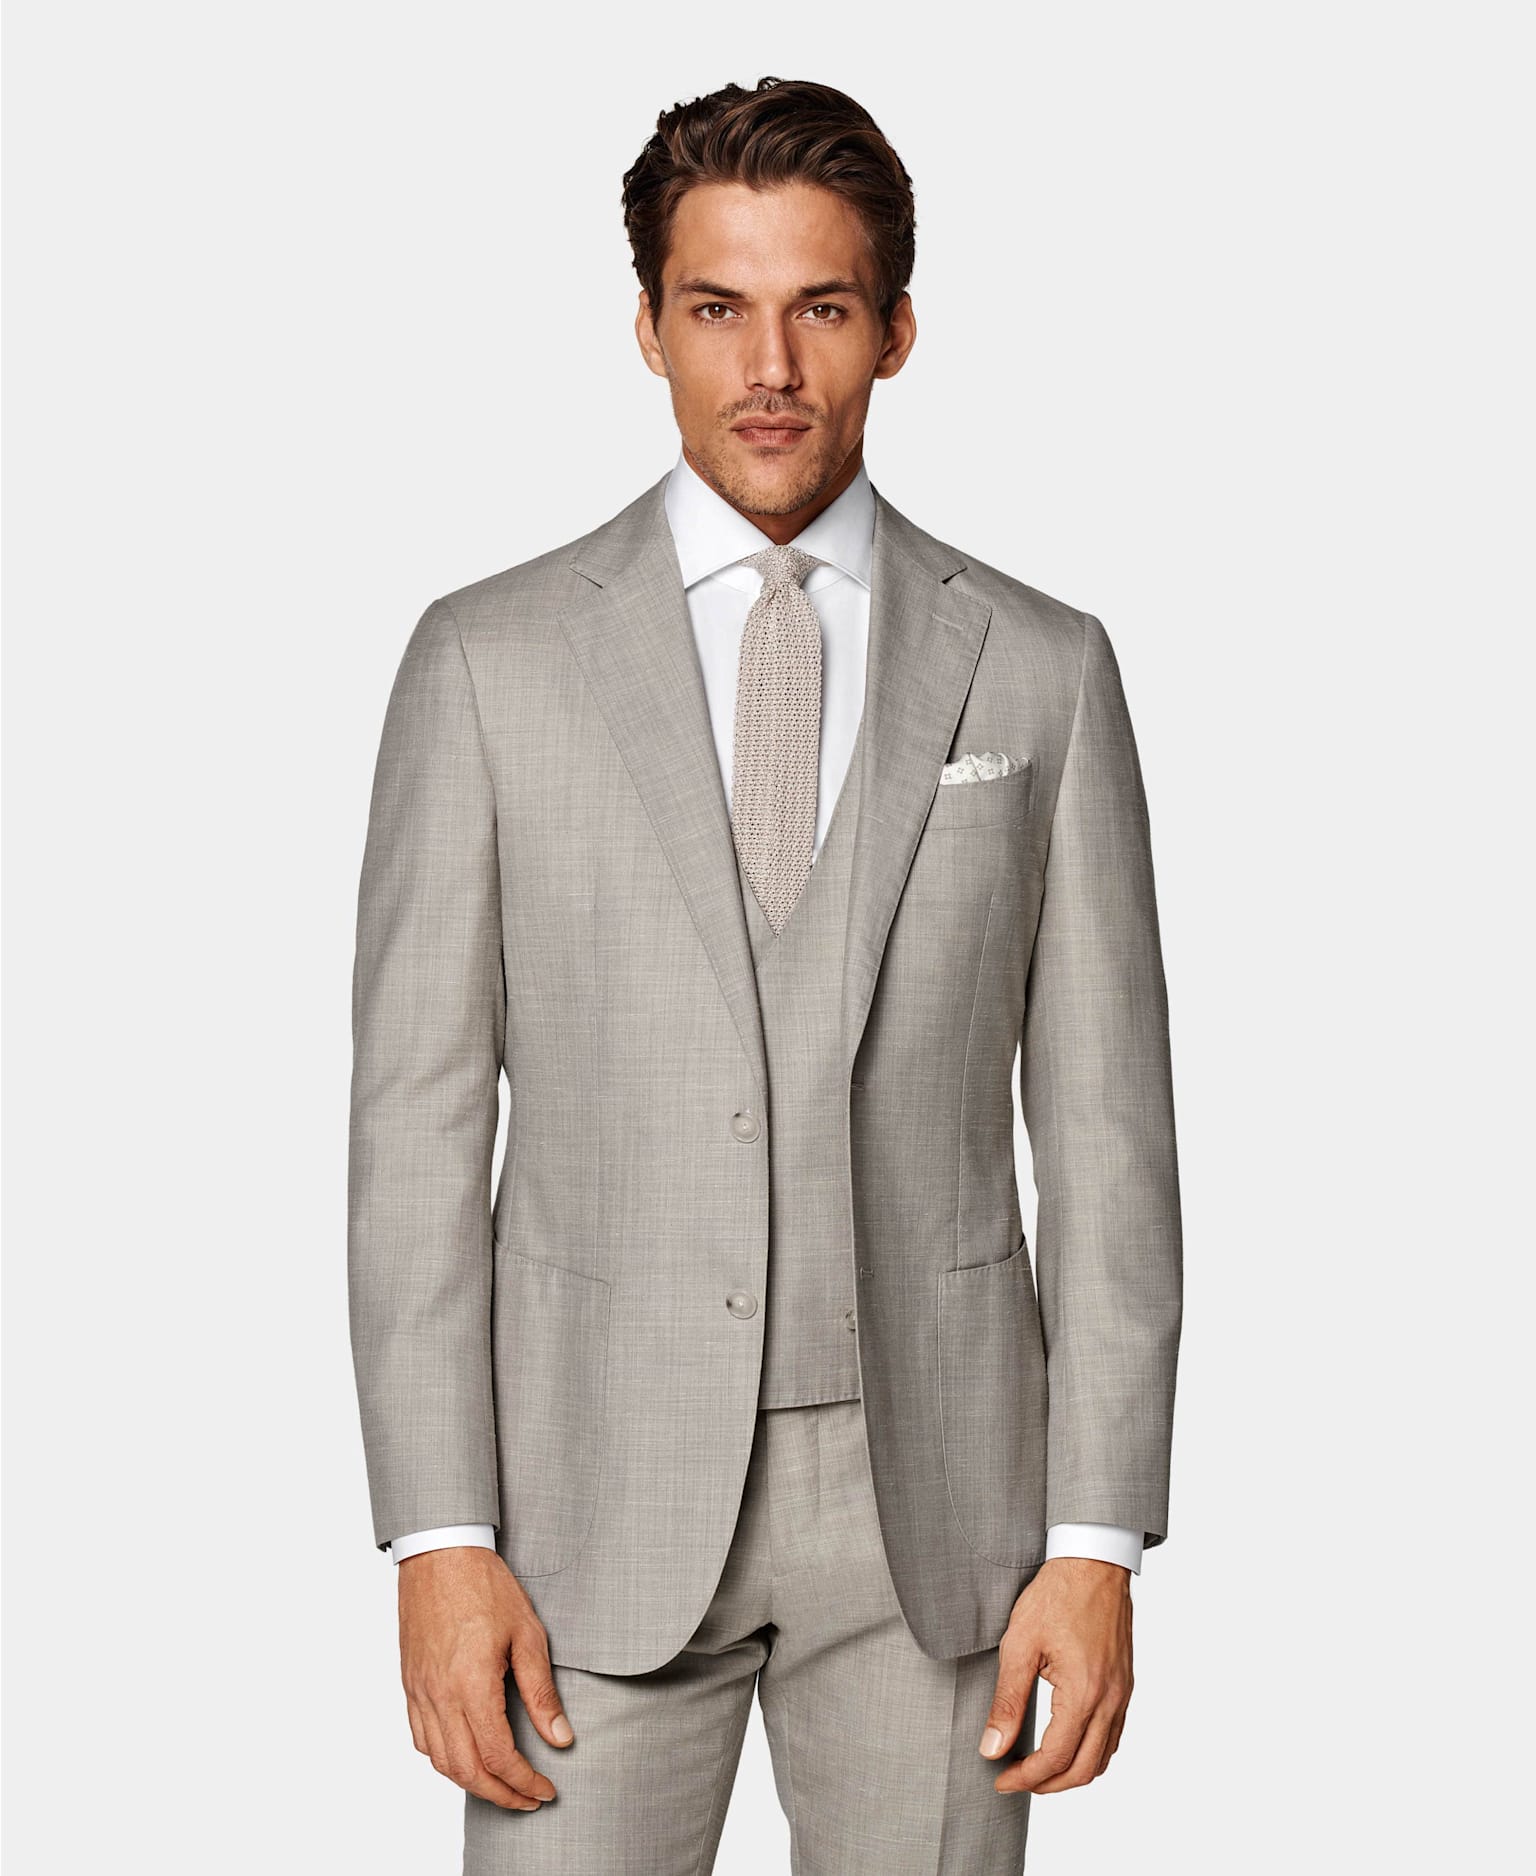 For a spring and summer wedding a light brown three piece suit paired with a knitted tie is a greats look.